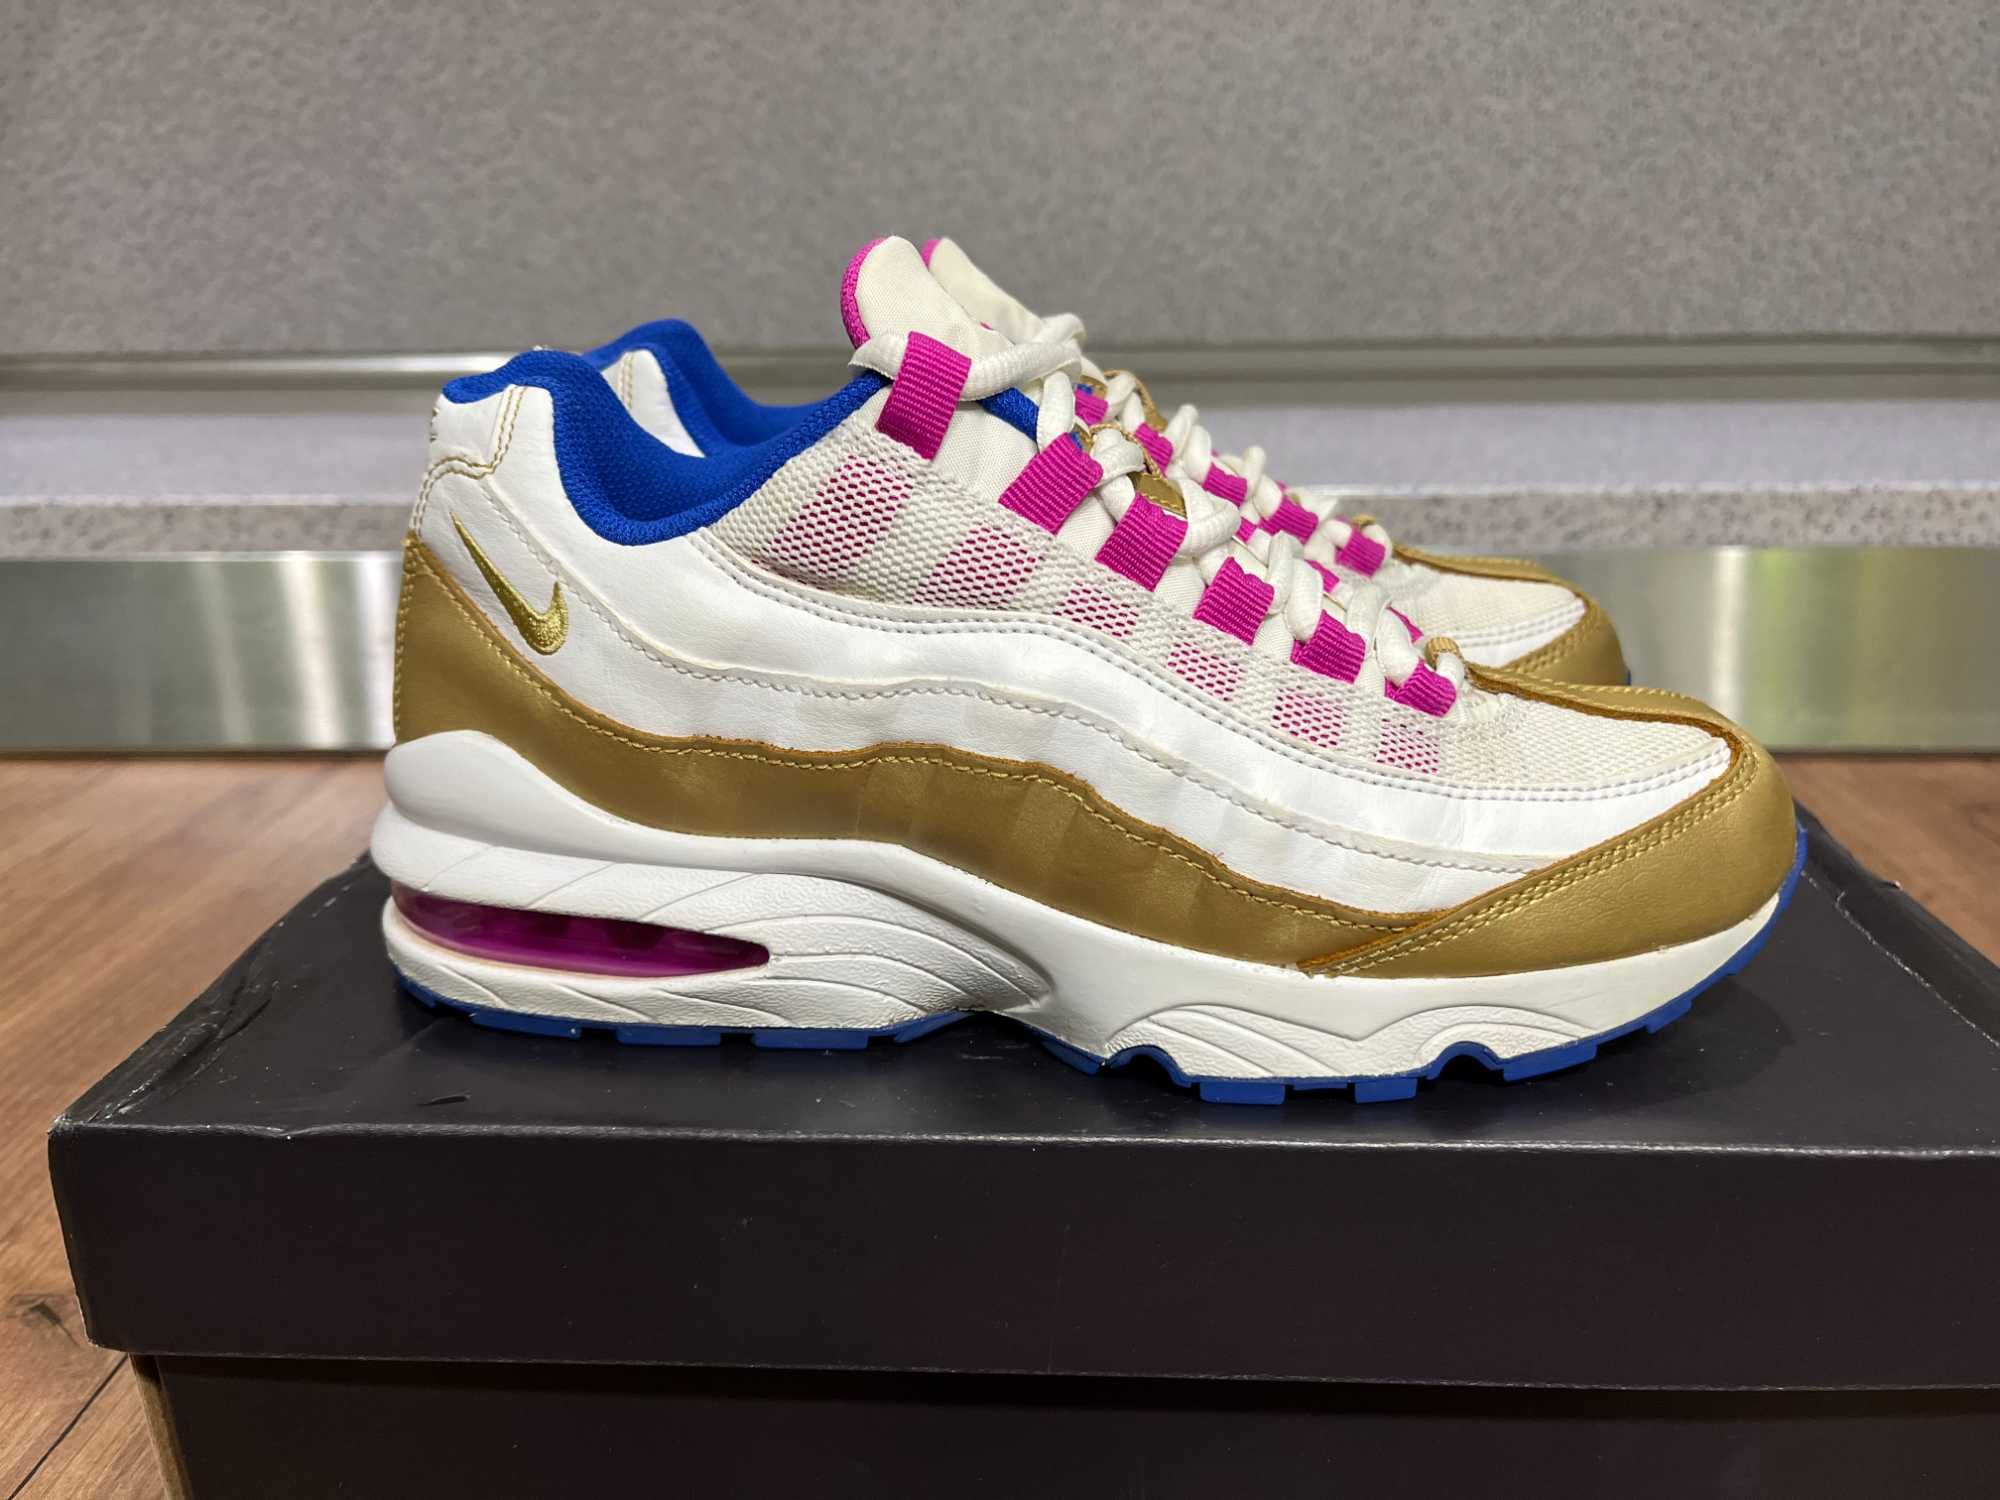 ОРИГИНАЛНИ *** Nike Air Max 95 / Peanut Butter & Jelly